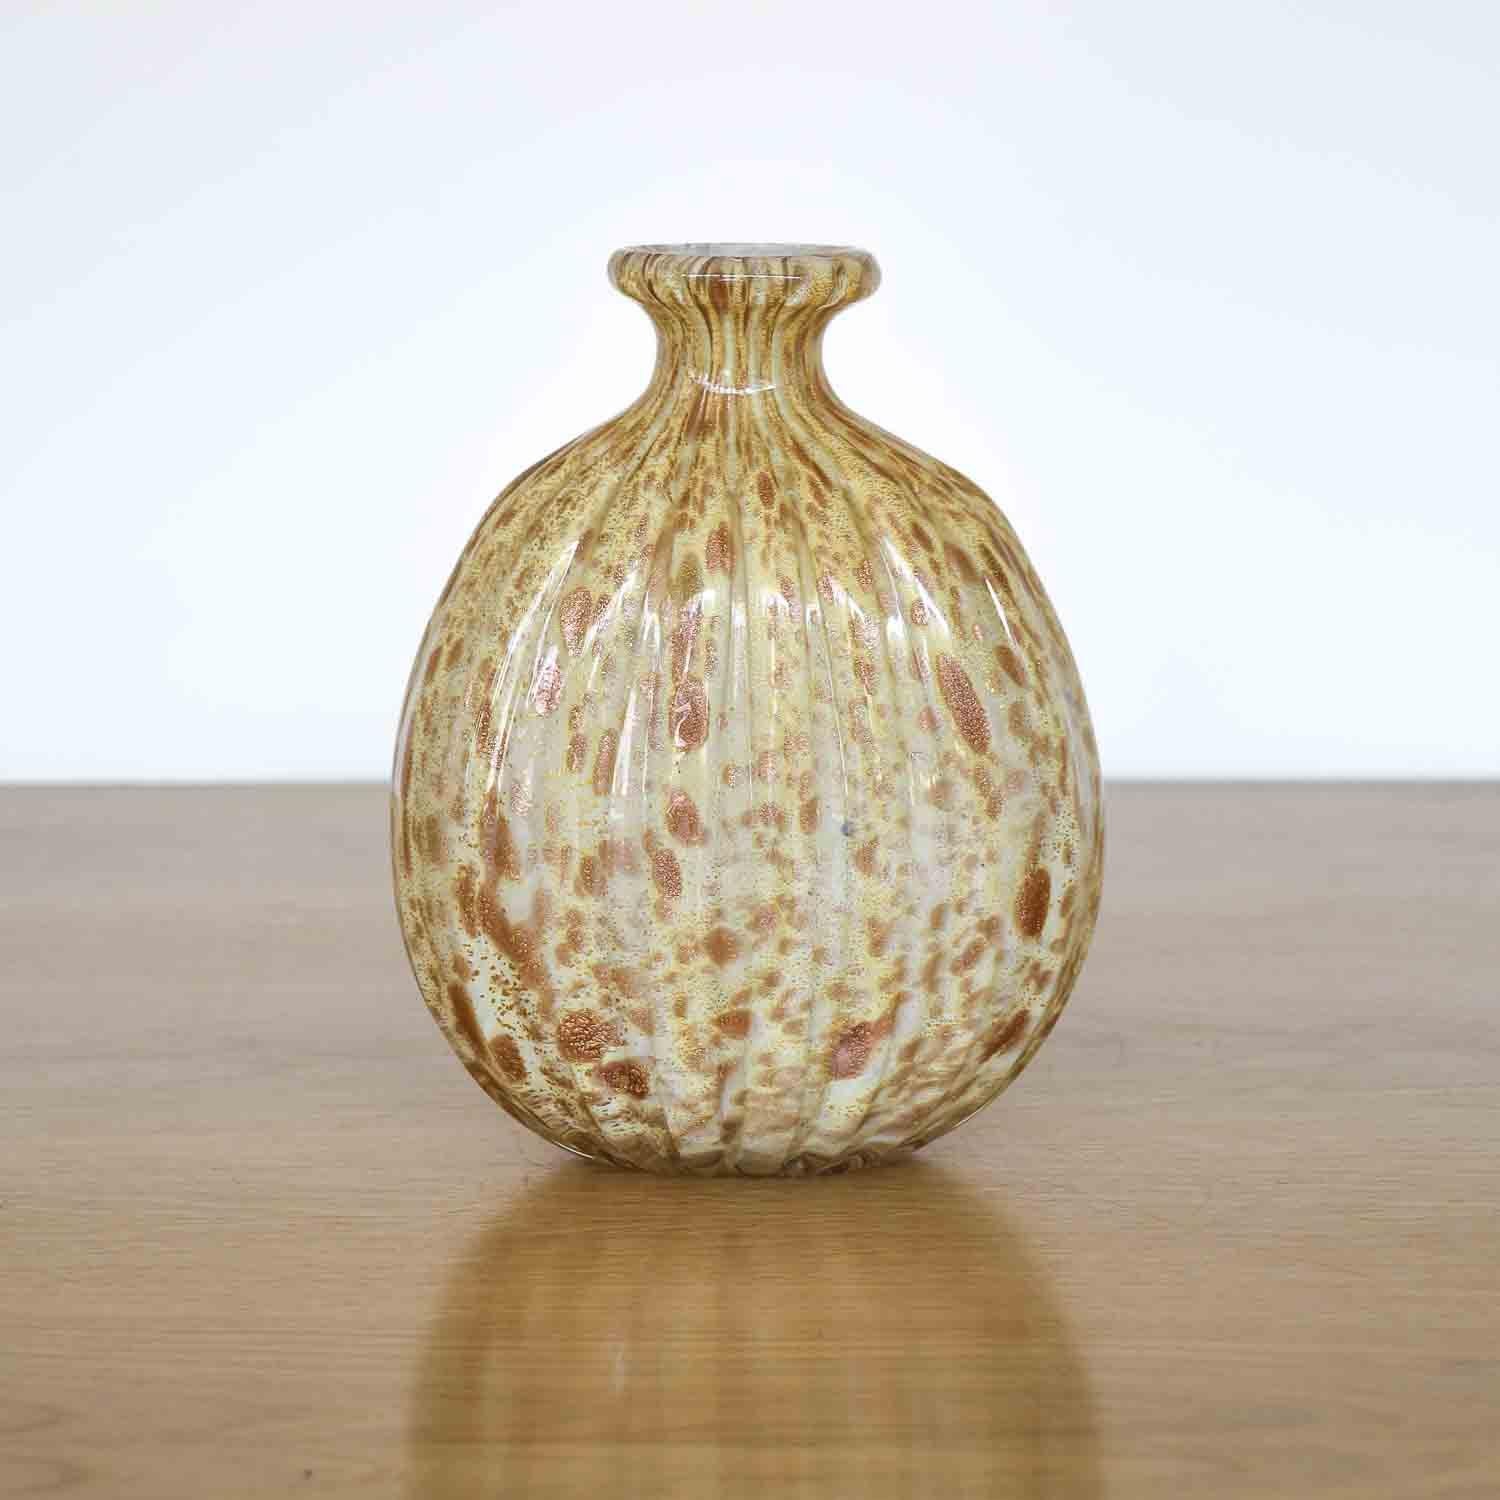 Beautiful vintage Italian vase made of gold-colored Murano glass. Ribbed blown glass with gold and bronze flecks. Stunning and unique piece.